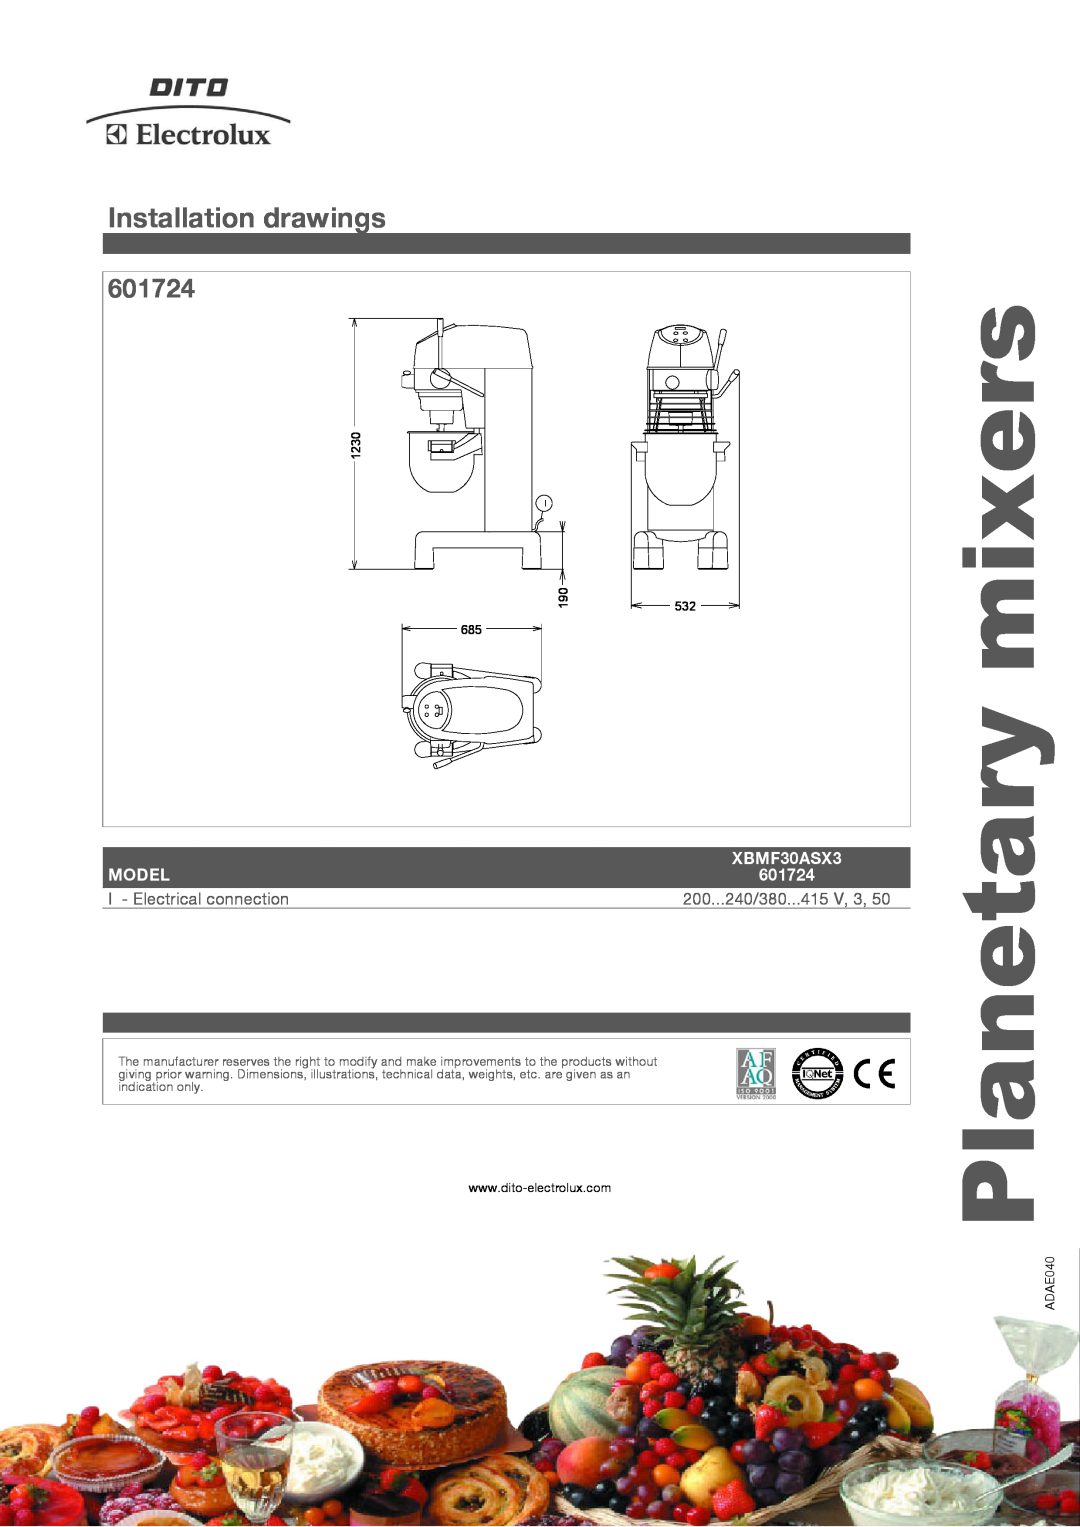 Electrolux XBMF30ASX3 Installation drawings, Planetary mixers, 601724, Model, I - Electrical connection, 1230 685, ADAE040 